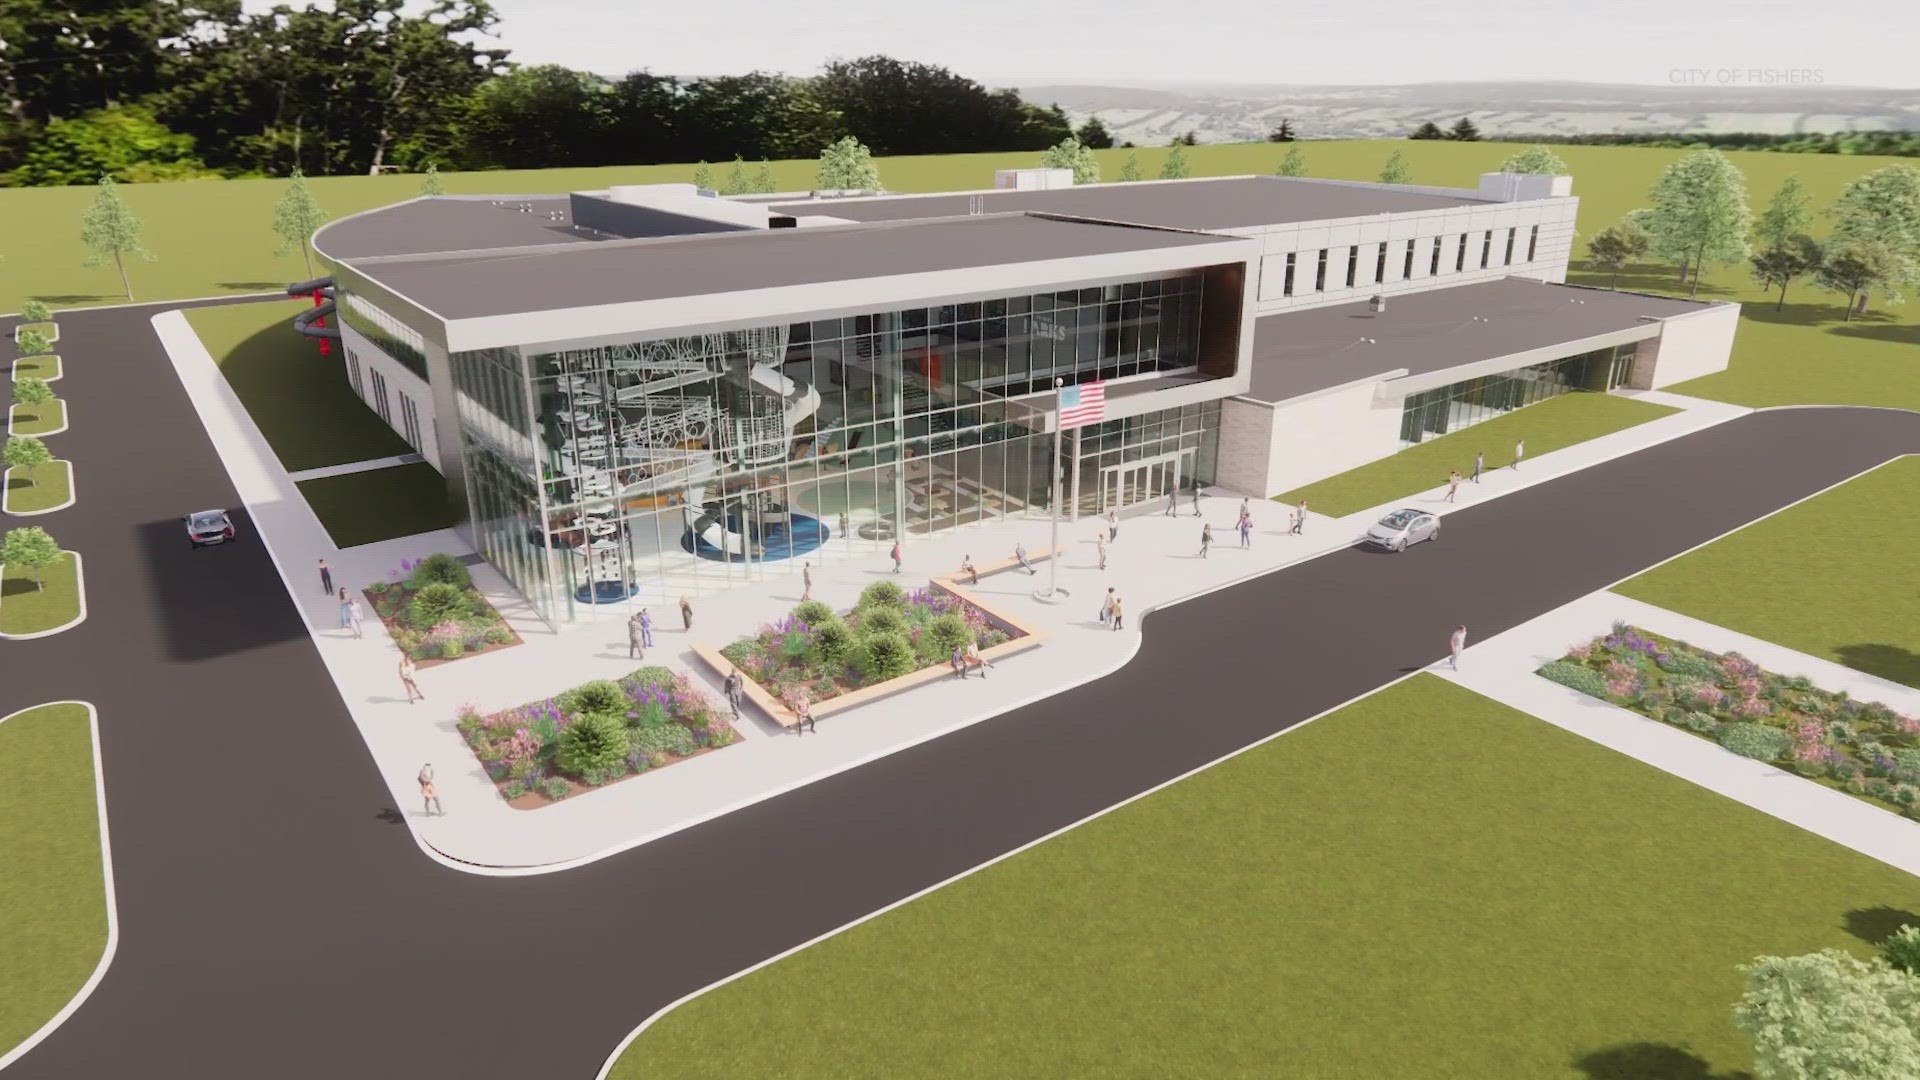 The City of Fishers is proposing a new $60 million community center with some top-notch amenities.